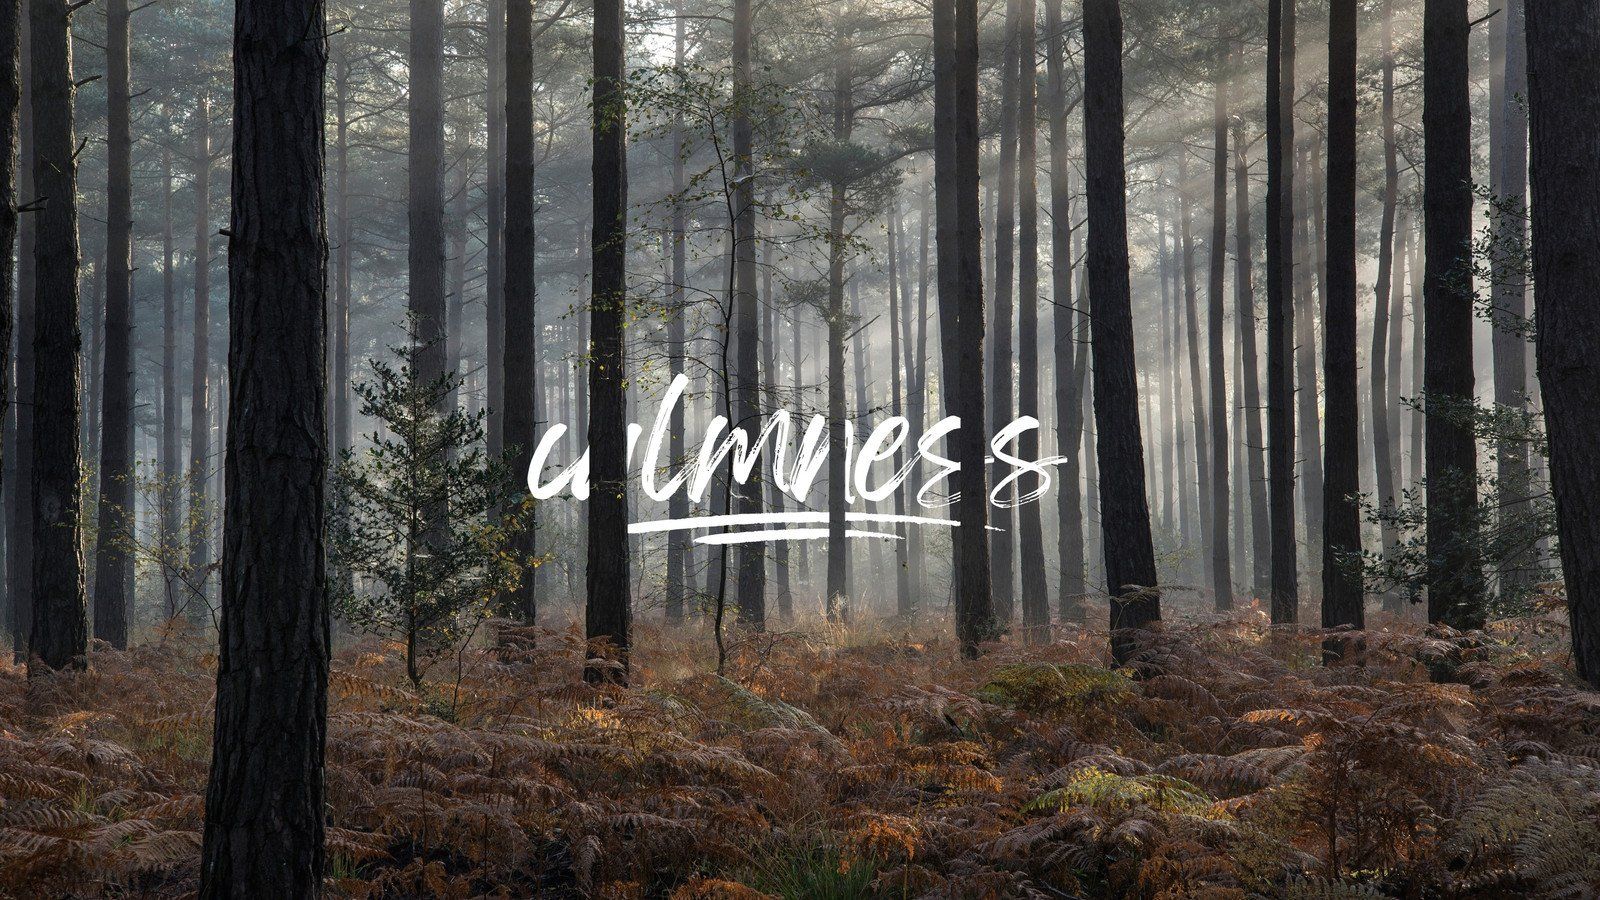 A misty forest with the word Lumves8 superimposed on top. - Forest, calming, woods